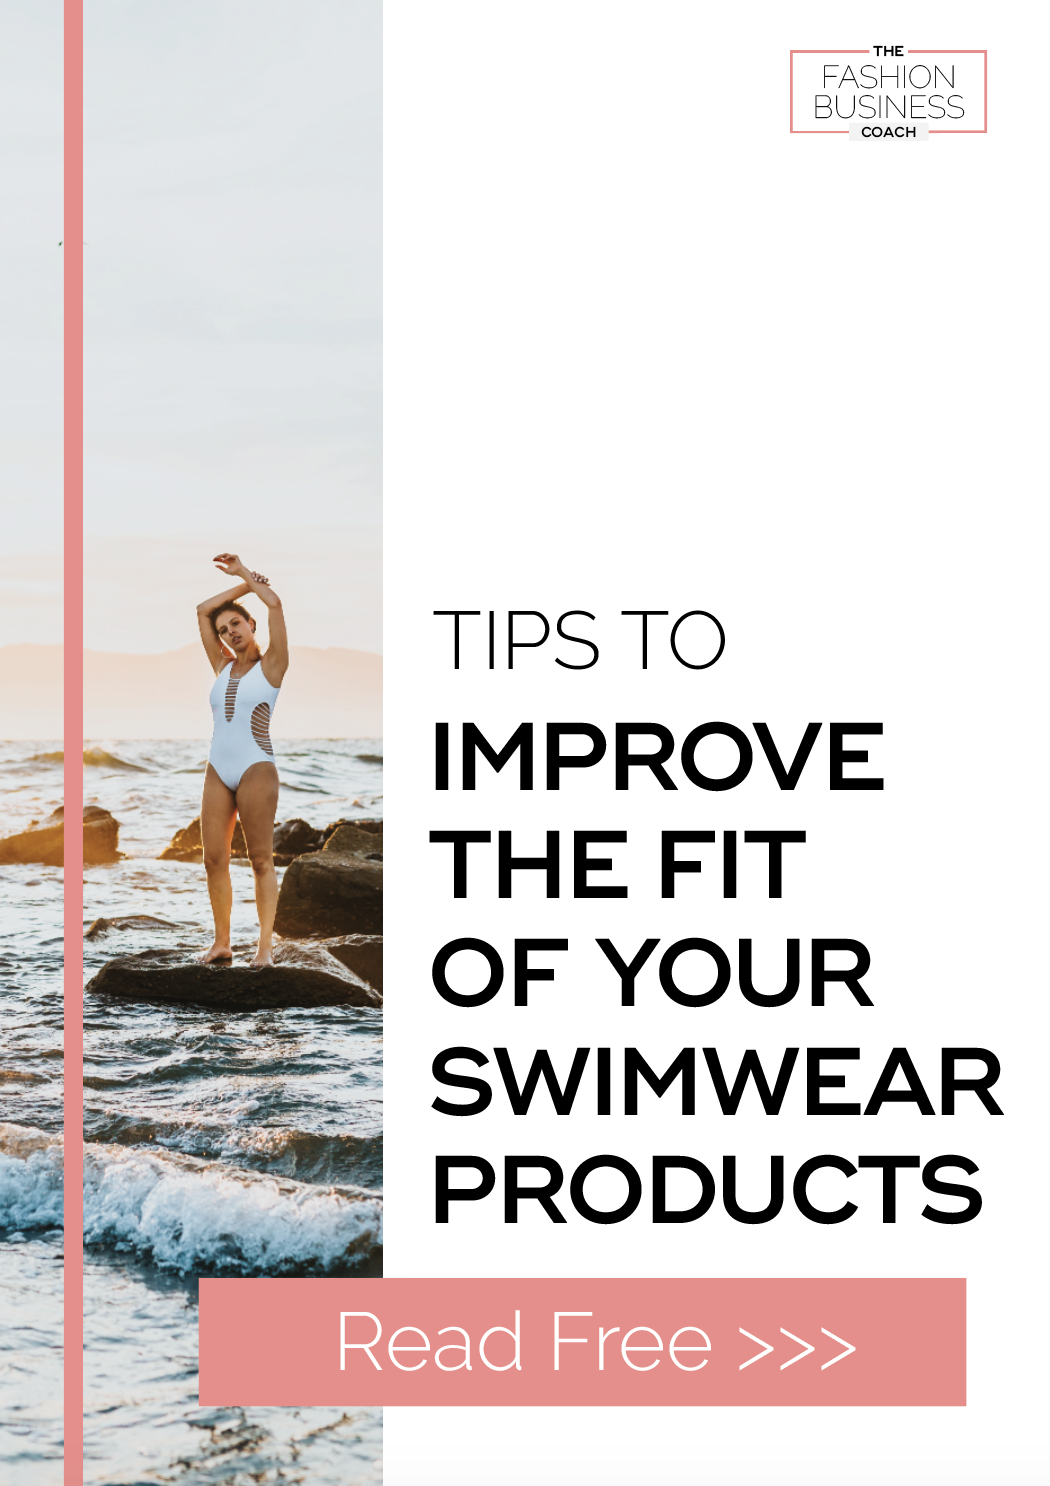 Tips to Improve the Fit of Your Swimwear Products 2.png